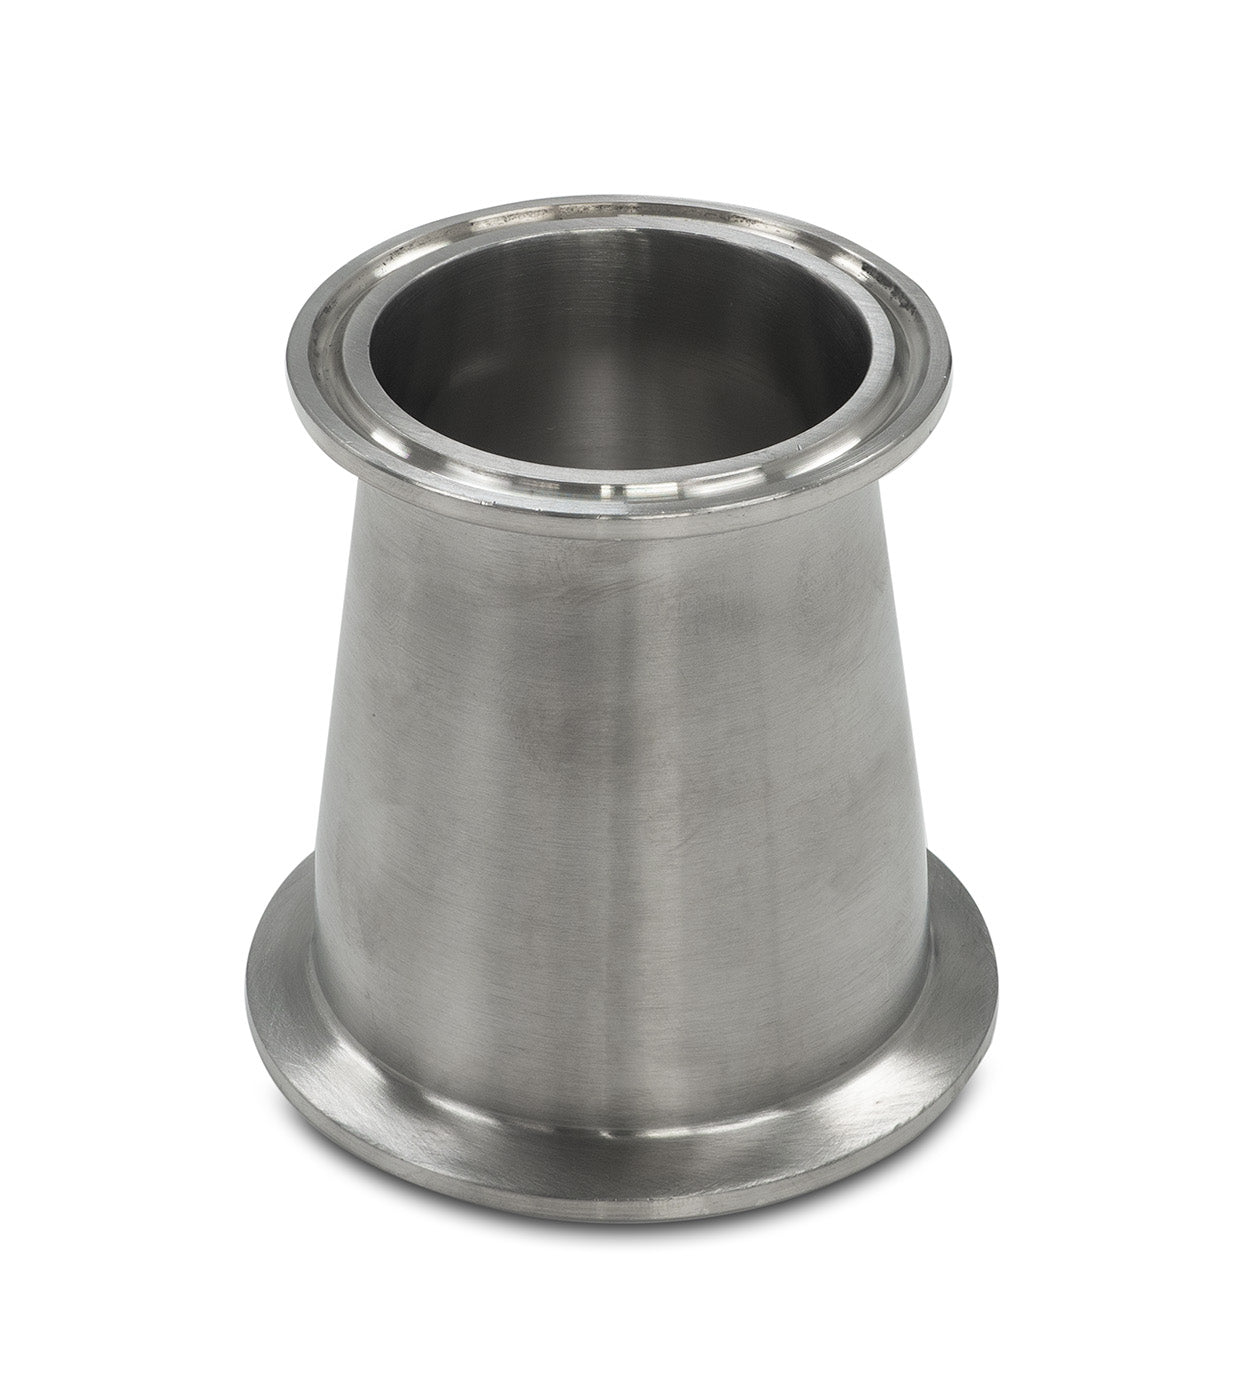 Conical Tri-Clamp Reducer Shop All Categories BVV 2.5" X 2" 